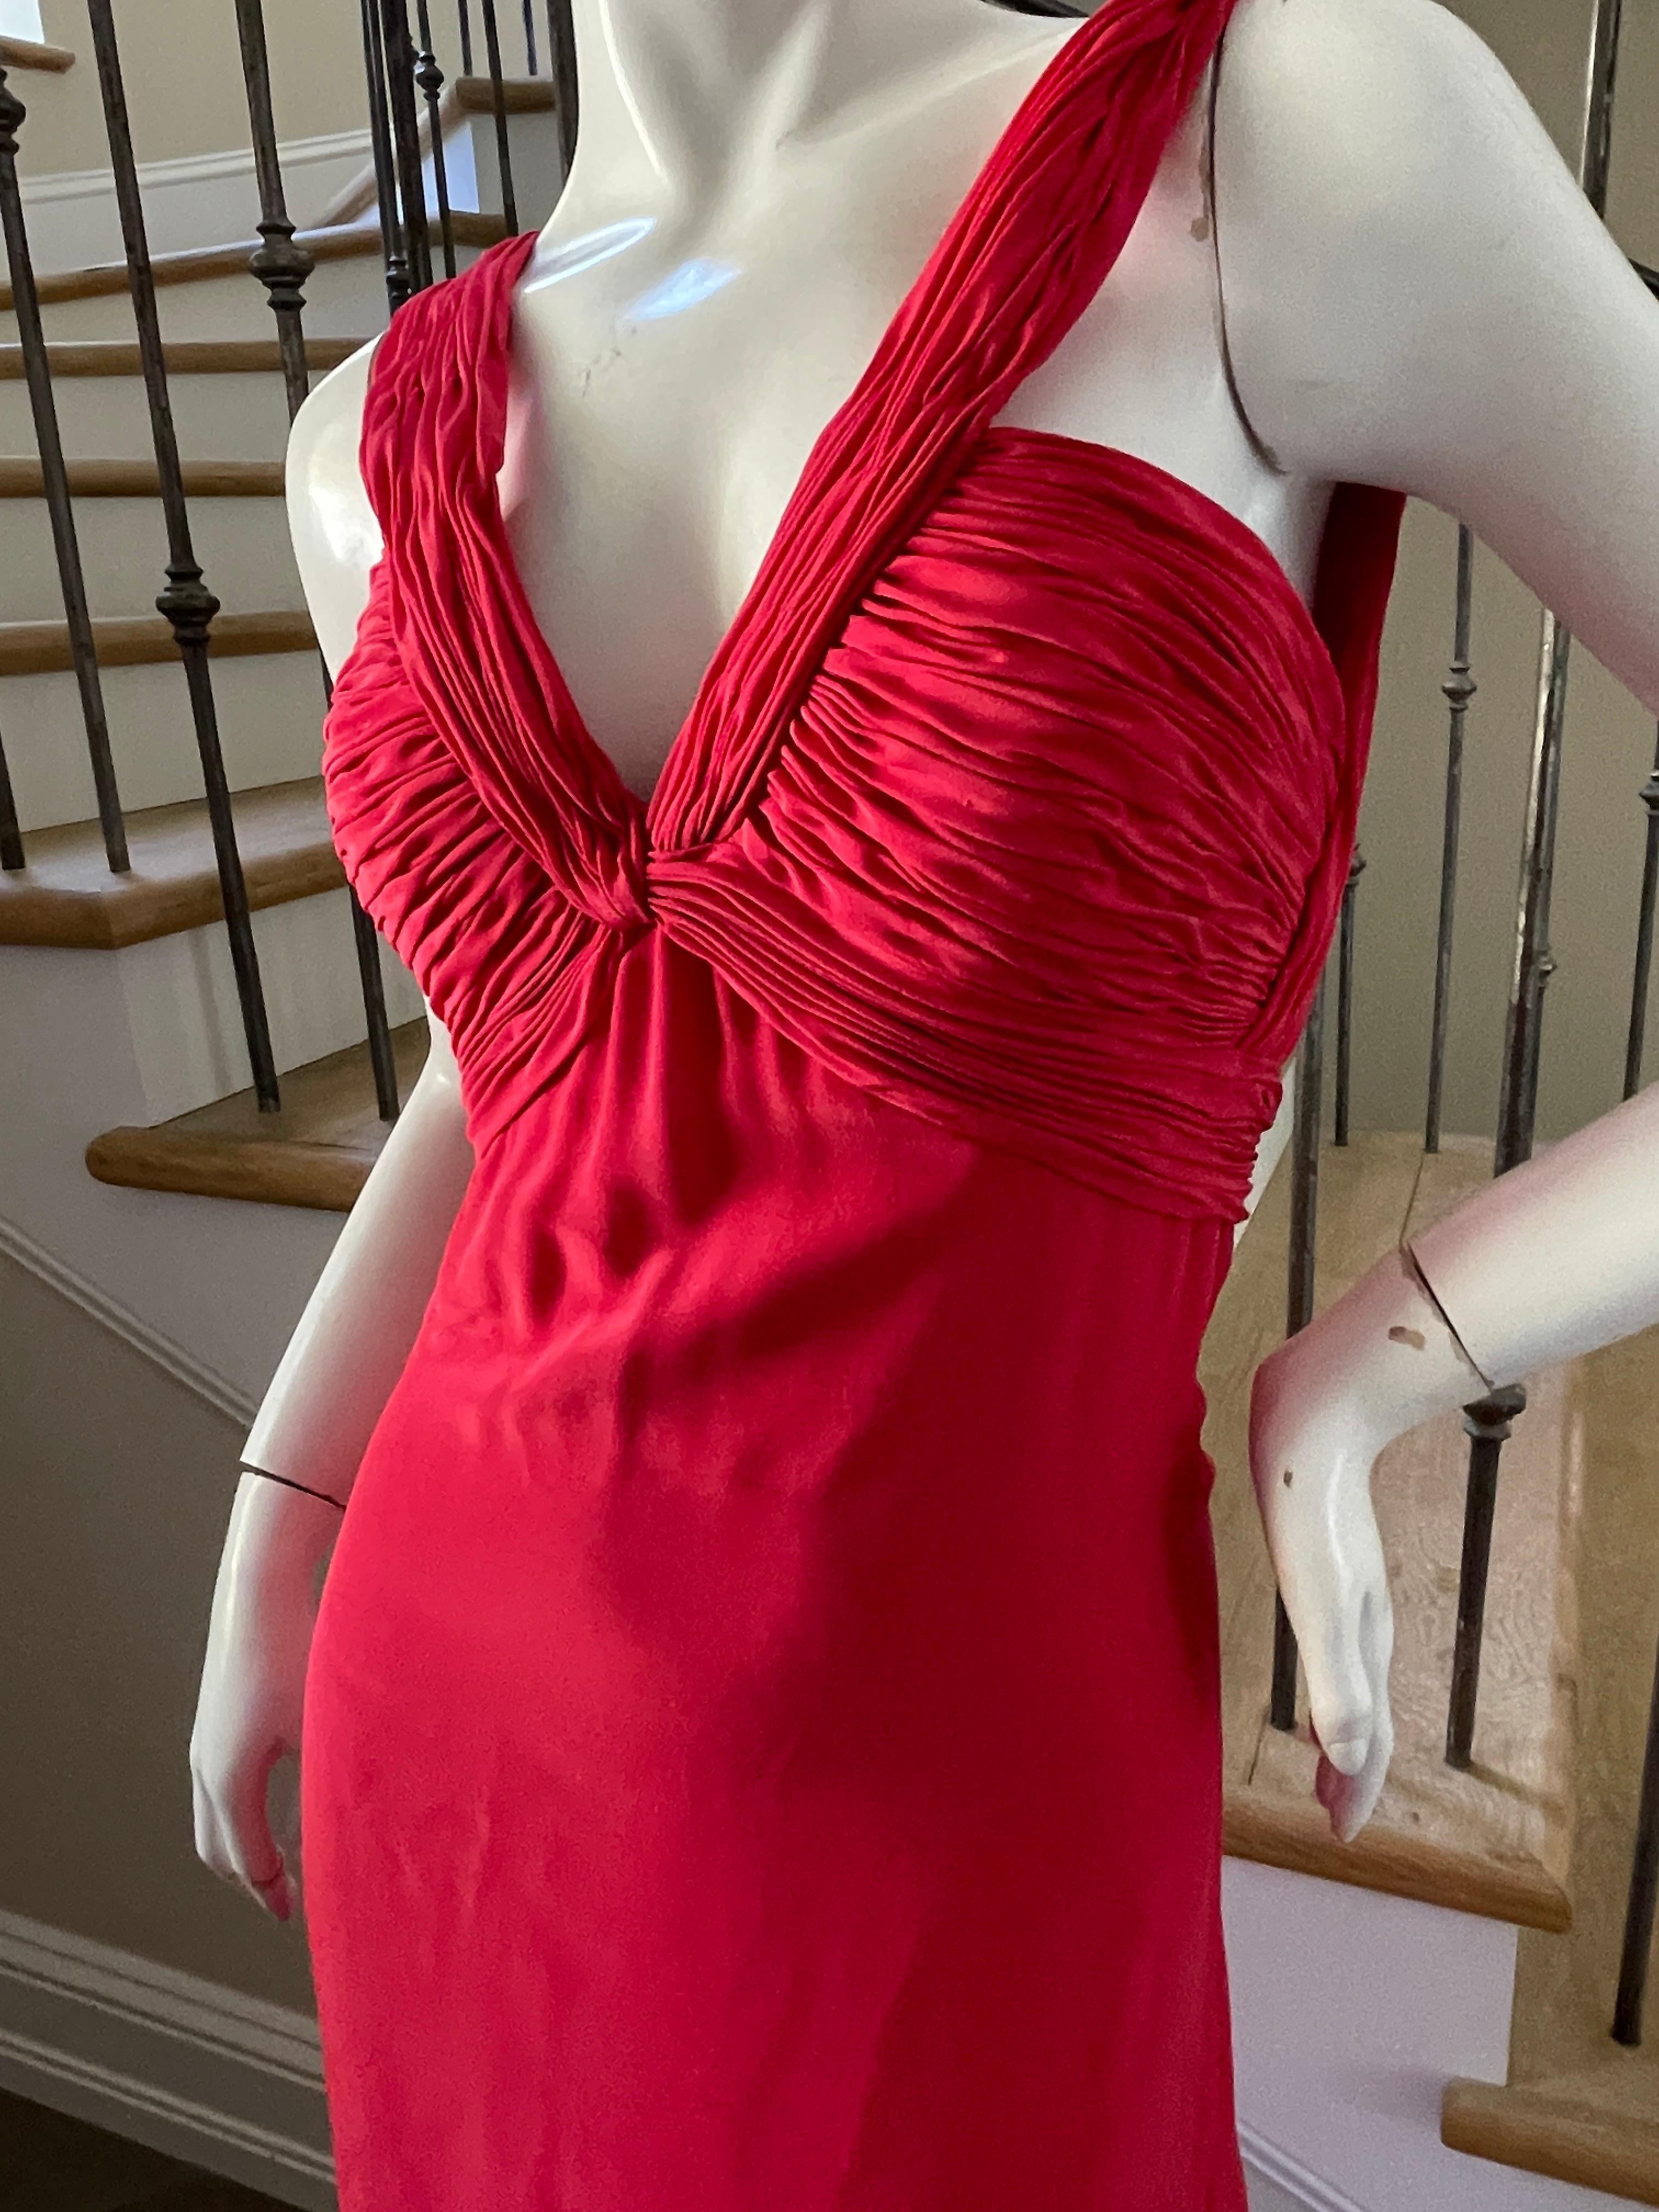 Oscar de la Renta VIntage Red Silk Evening Dress with Plunging Neckline.
Please use the zoom feature to see details, it is really pretty .
 Size 10, runs small
 Bust 36